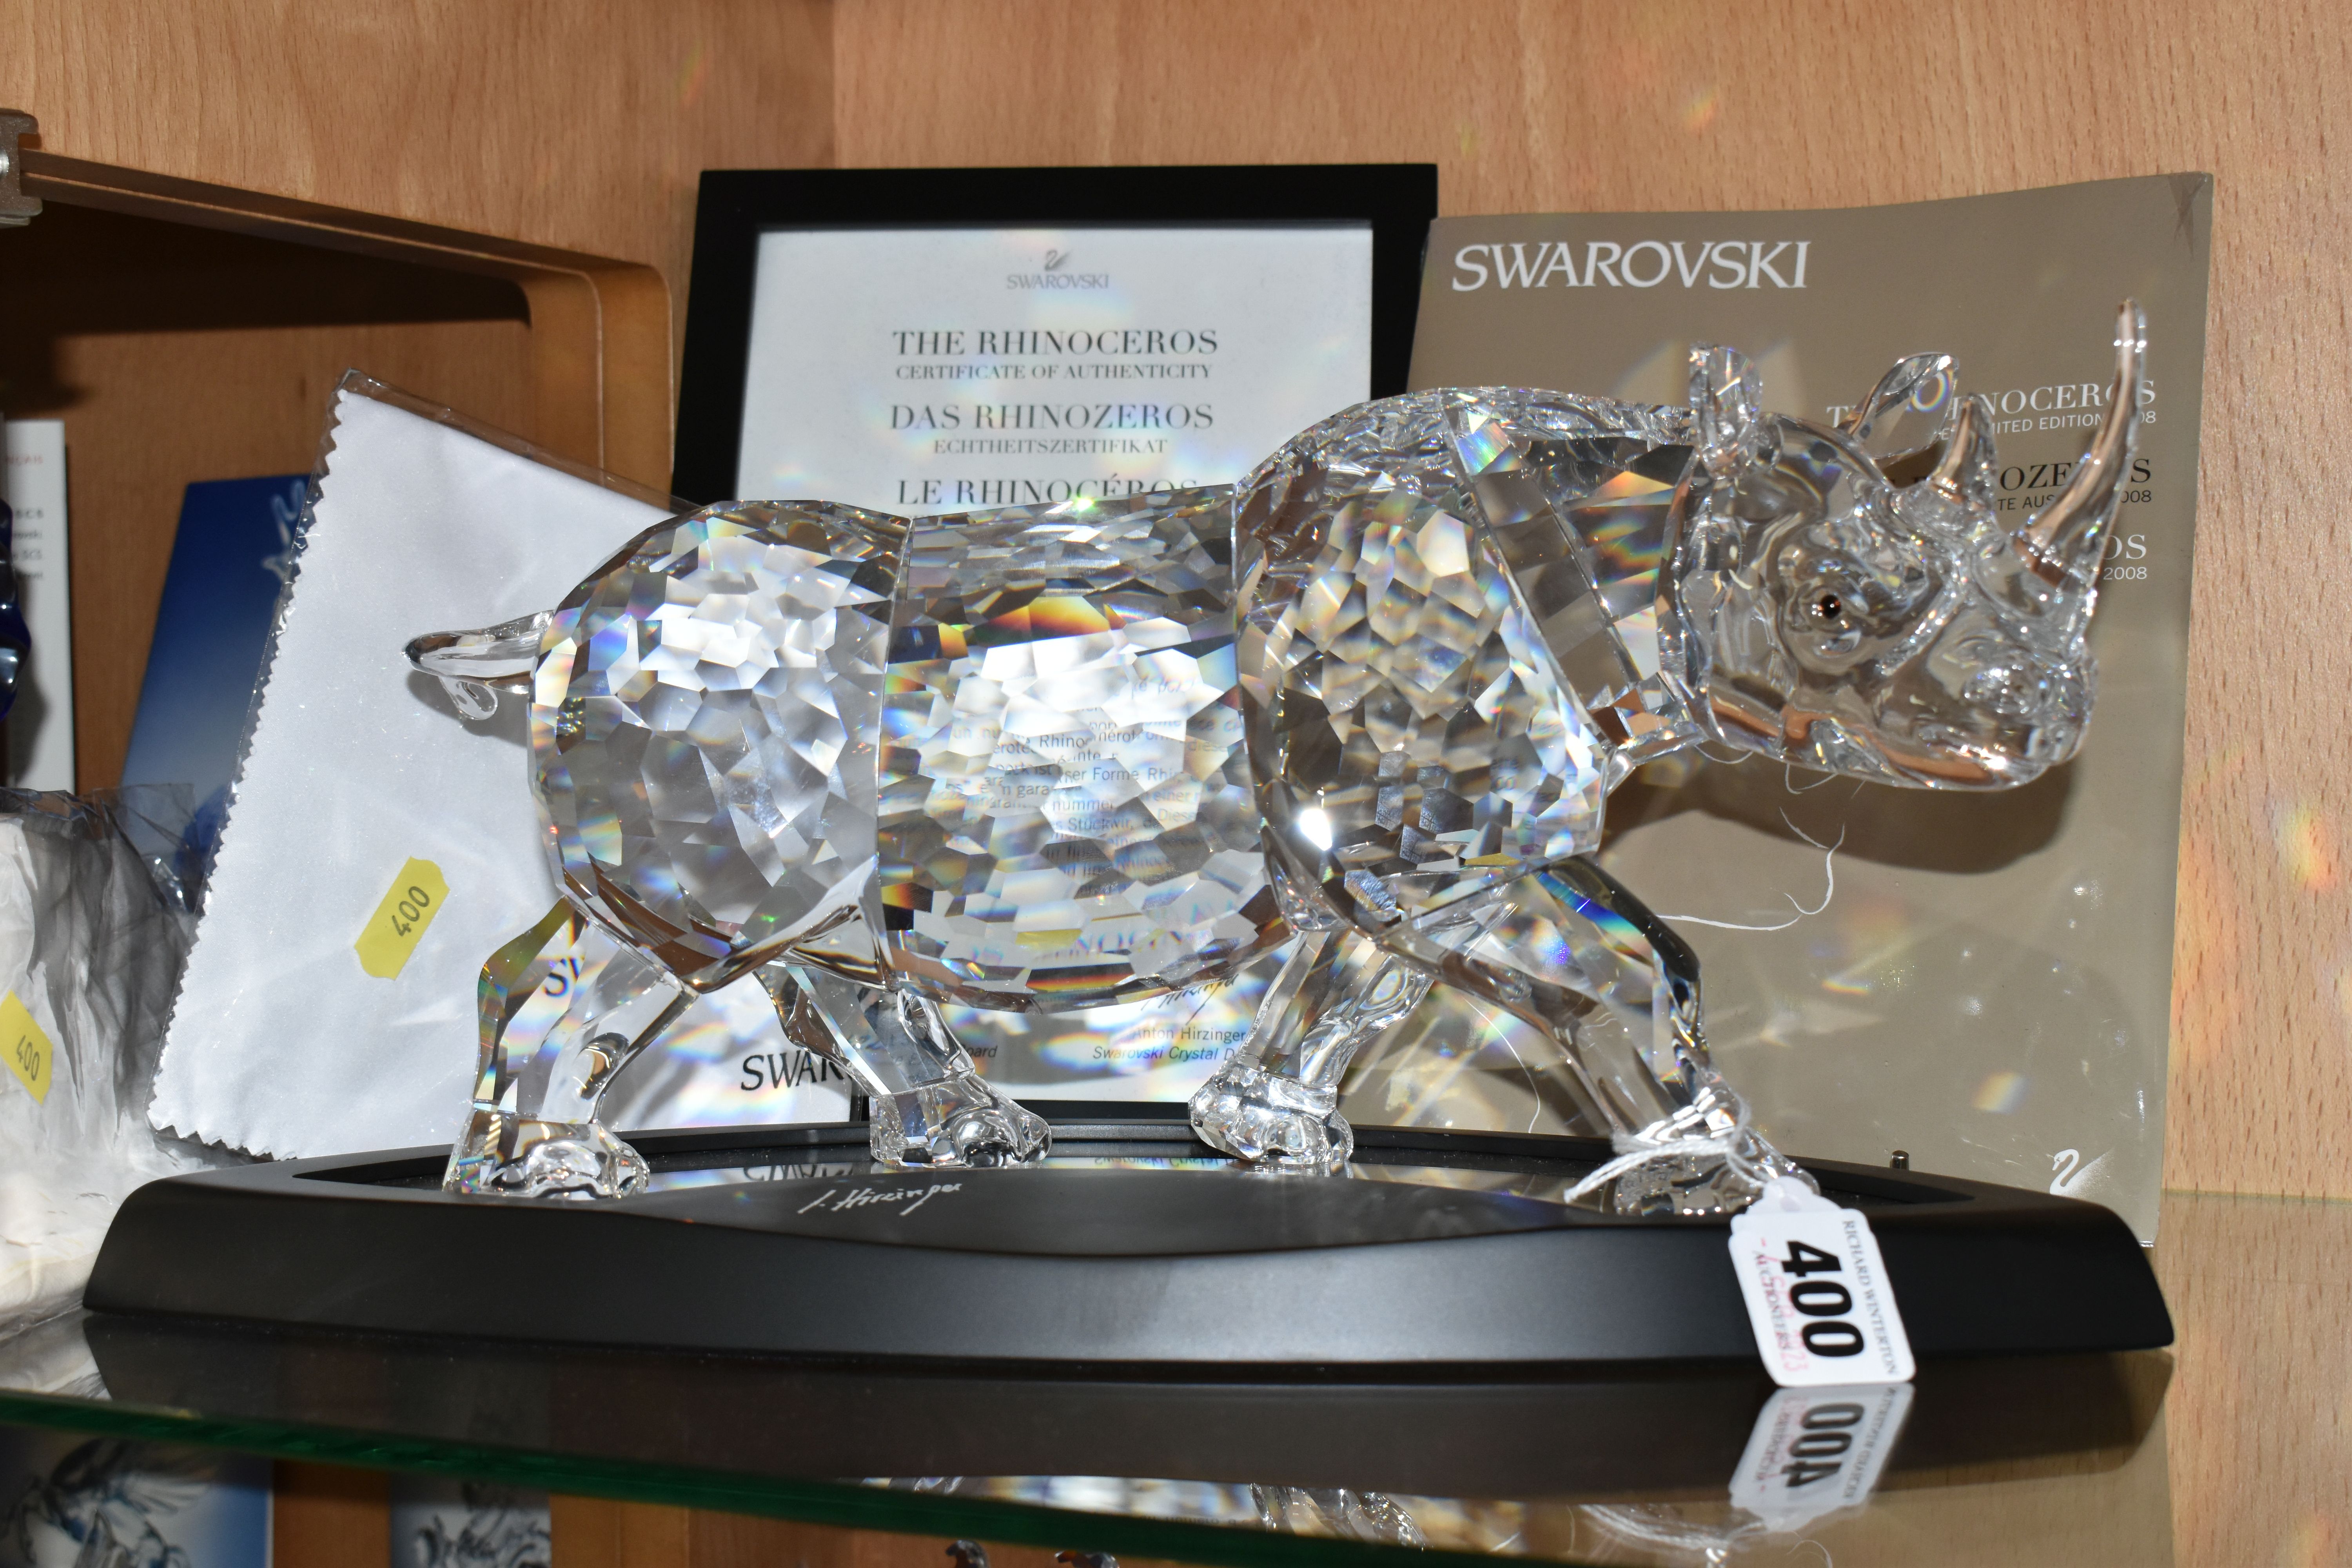 A CASED/OUTER BOX SWAROVSKI CRYSTAL LIMITED EDITION RHINO SCULPTURE, numbered 4825/10000 to - Image 5 of 8